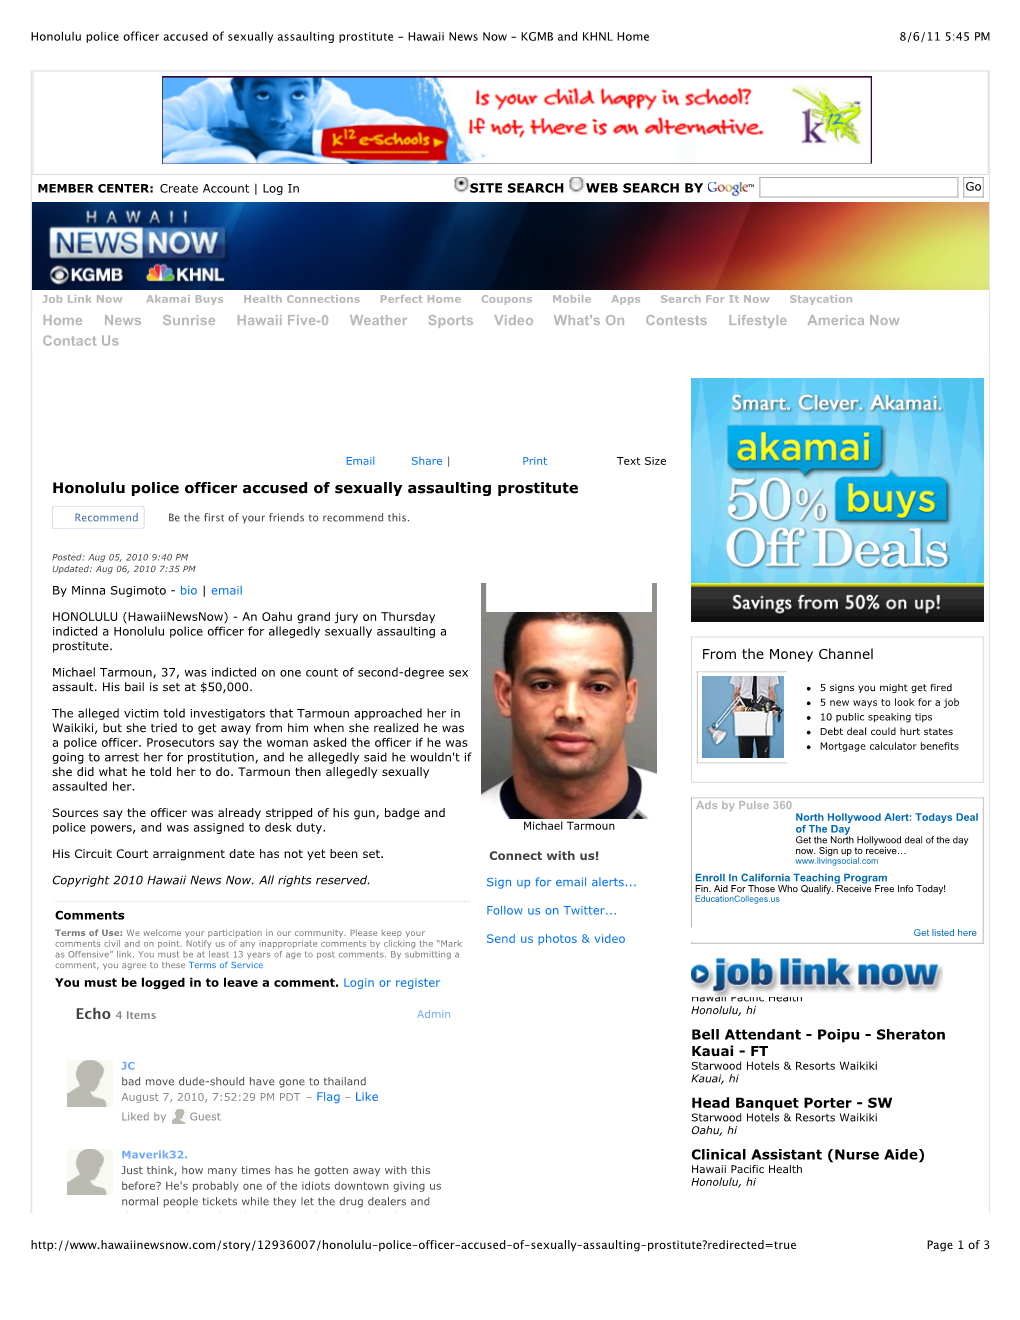 Honolulu Police Officer Accused of Sexually Assaulting Prostitute - Hawaii News Now - KGMB and KHNL Home 8/6/11 5:45 PM